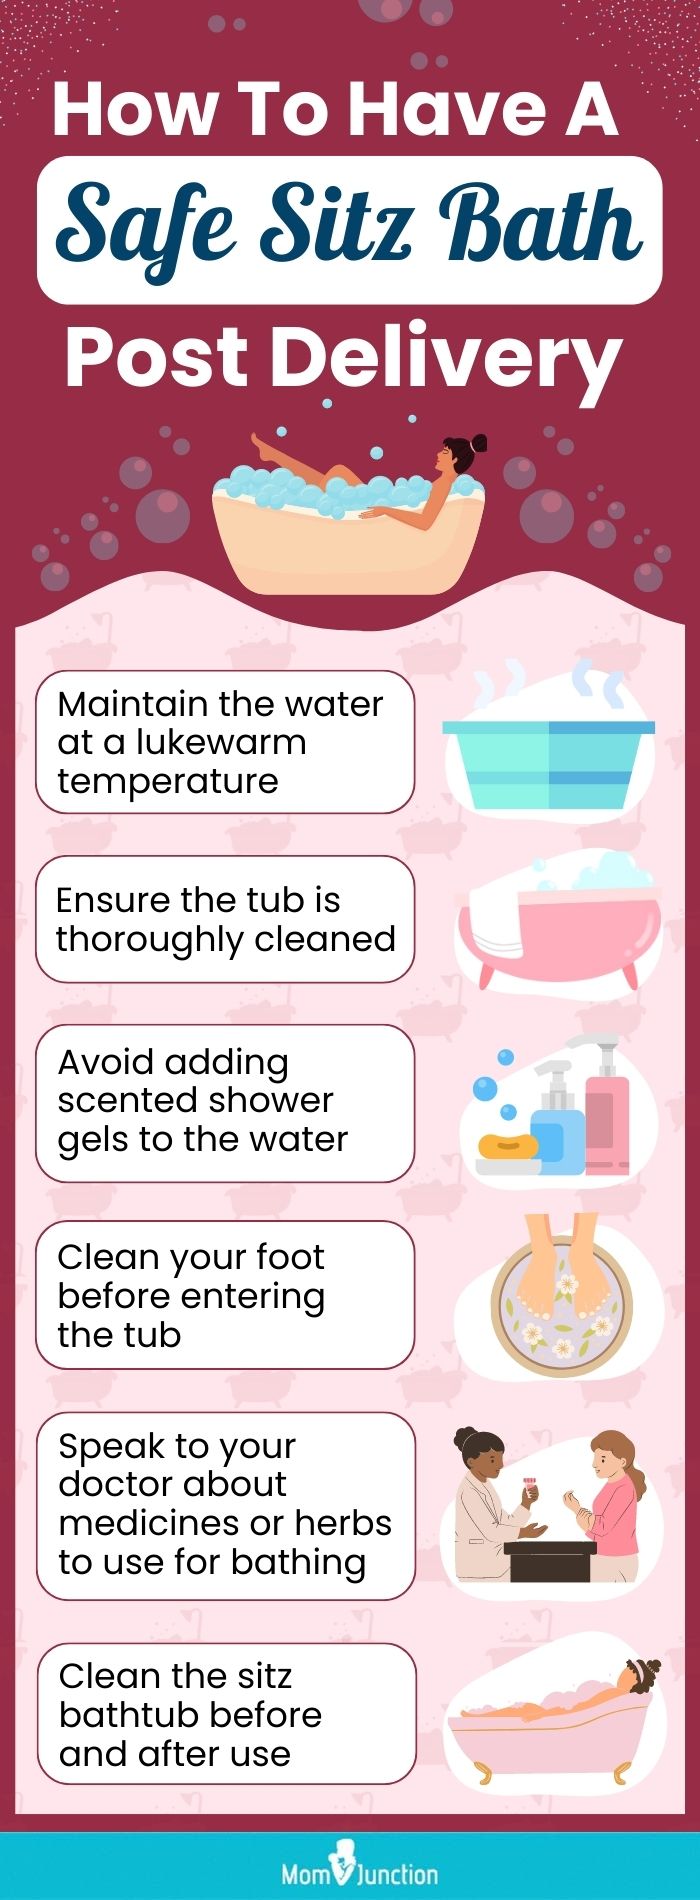 how to have a safe sitz bath post delivery (infographic)